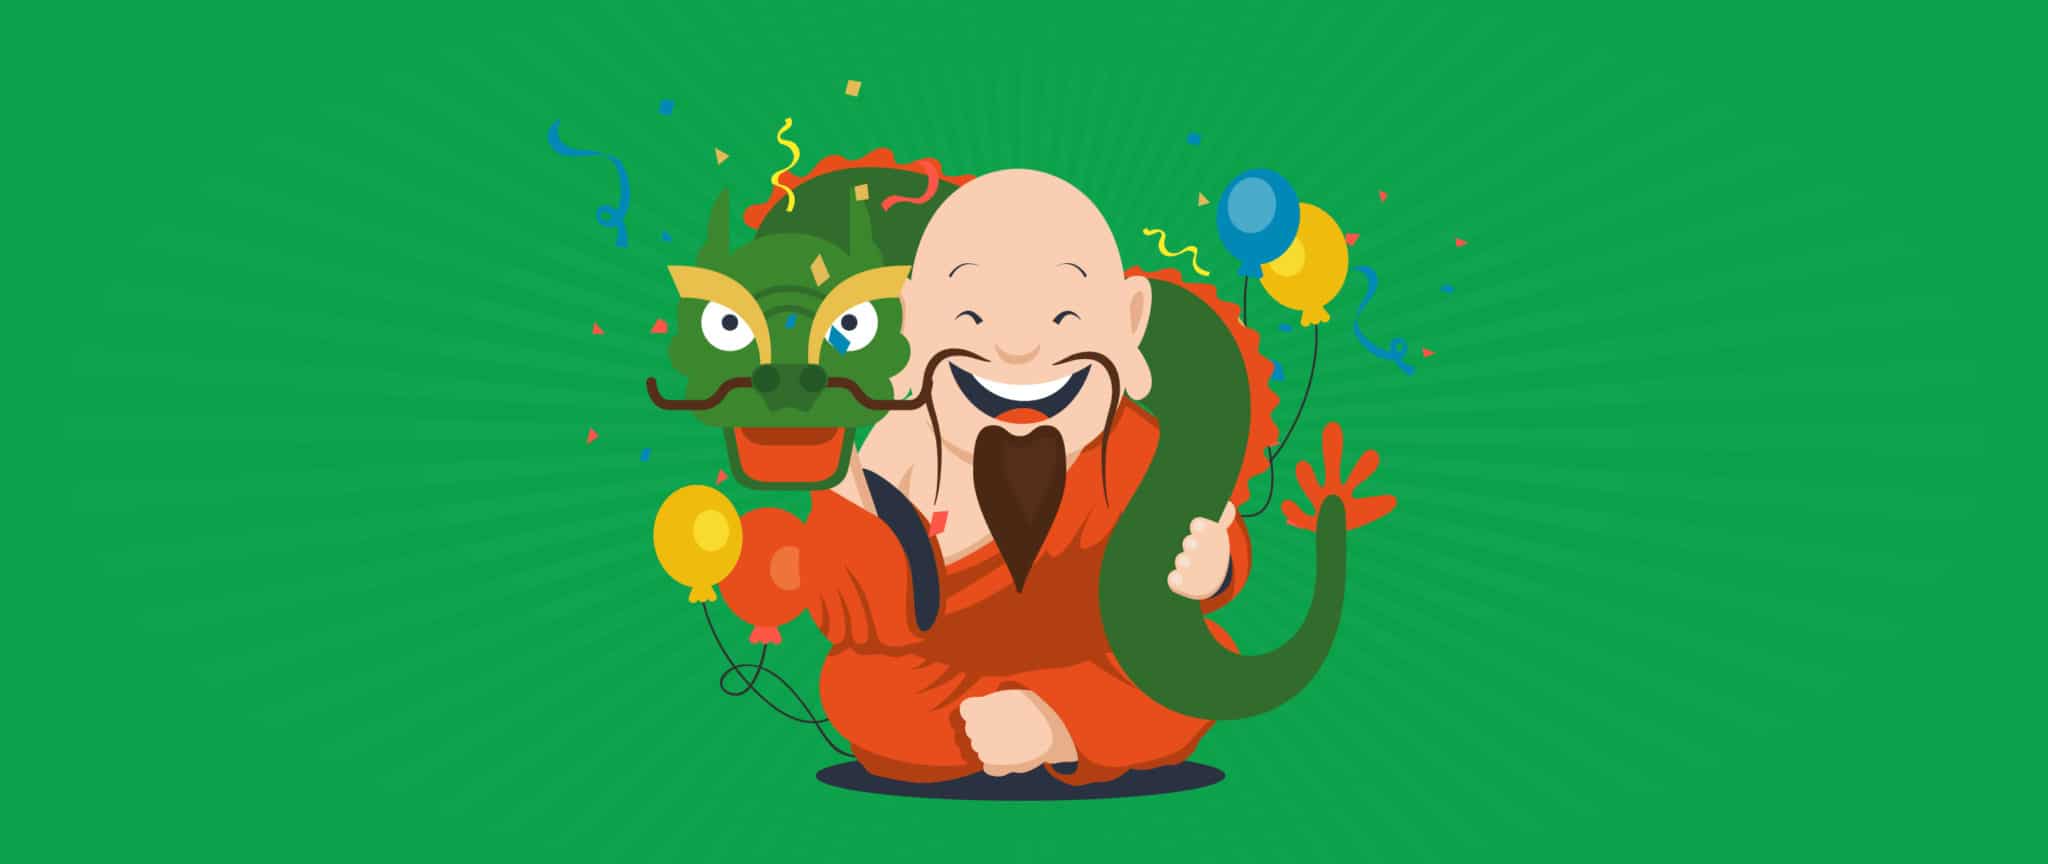 Budd the Monk celebrates the Chinese New Year. He has a dragon wrapped around him and is holding balloons.